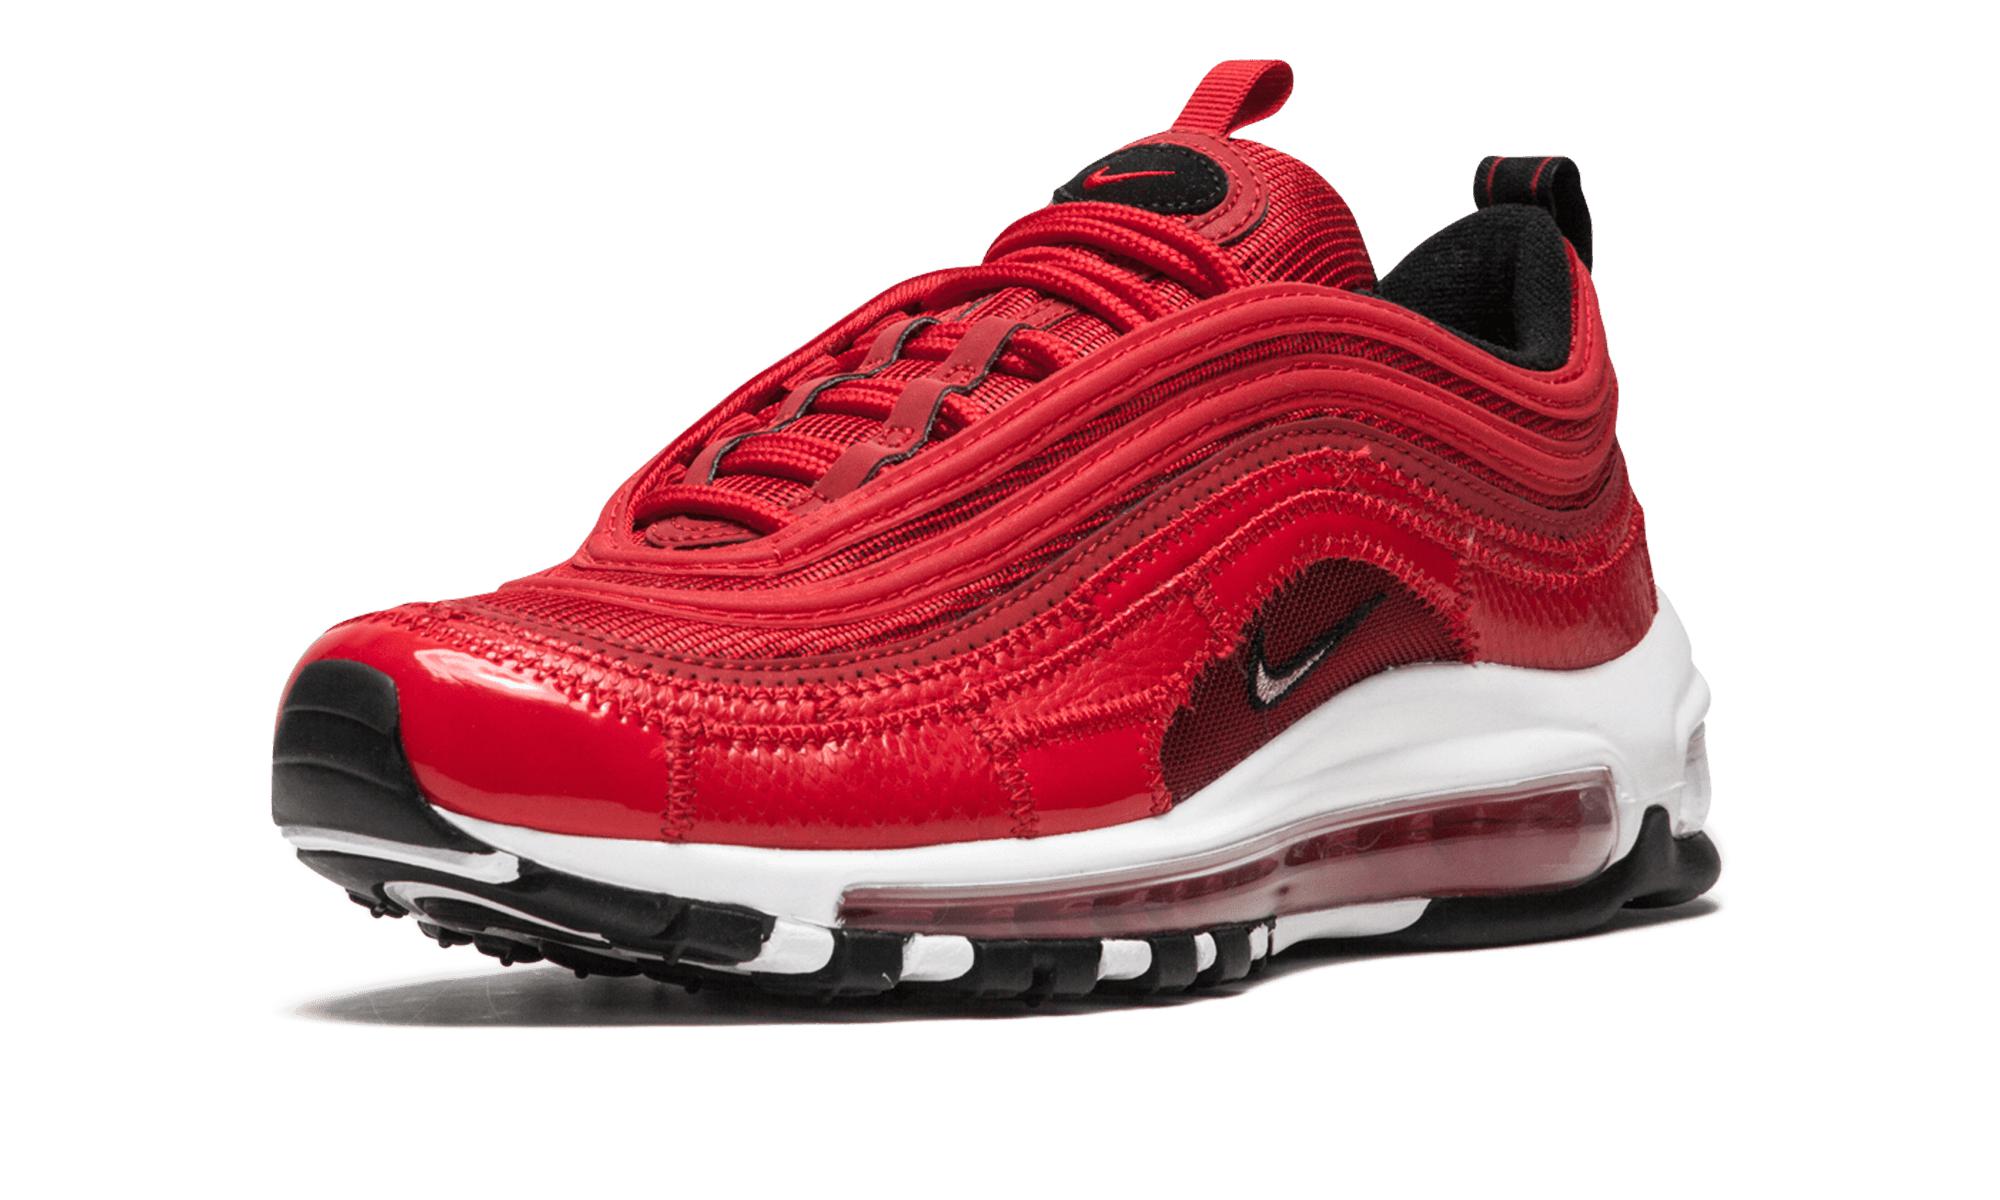 Nike Air Max 97 Cr7 Sneakers in Black,Gold,Red,White (Red) for Men - Lyst